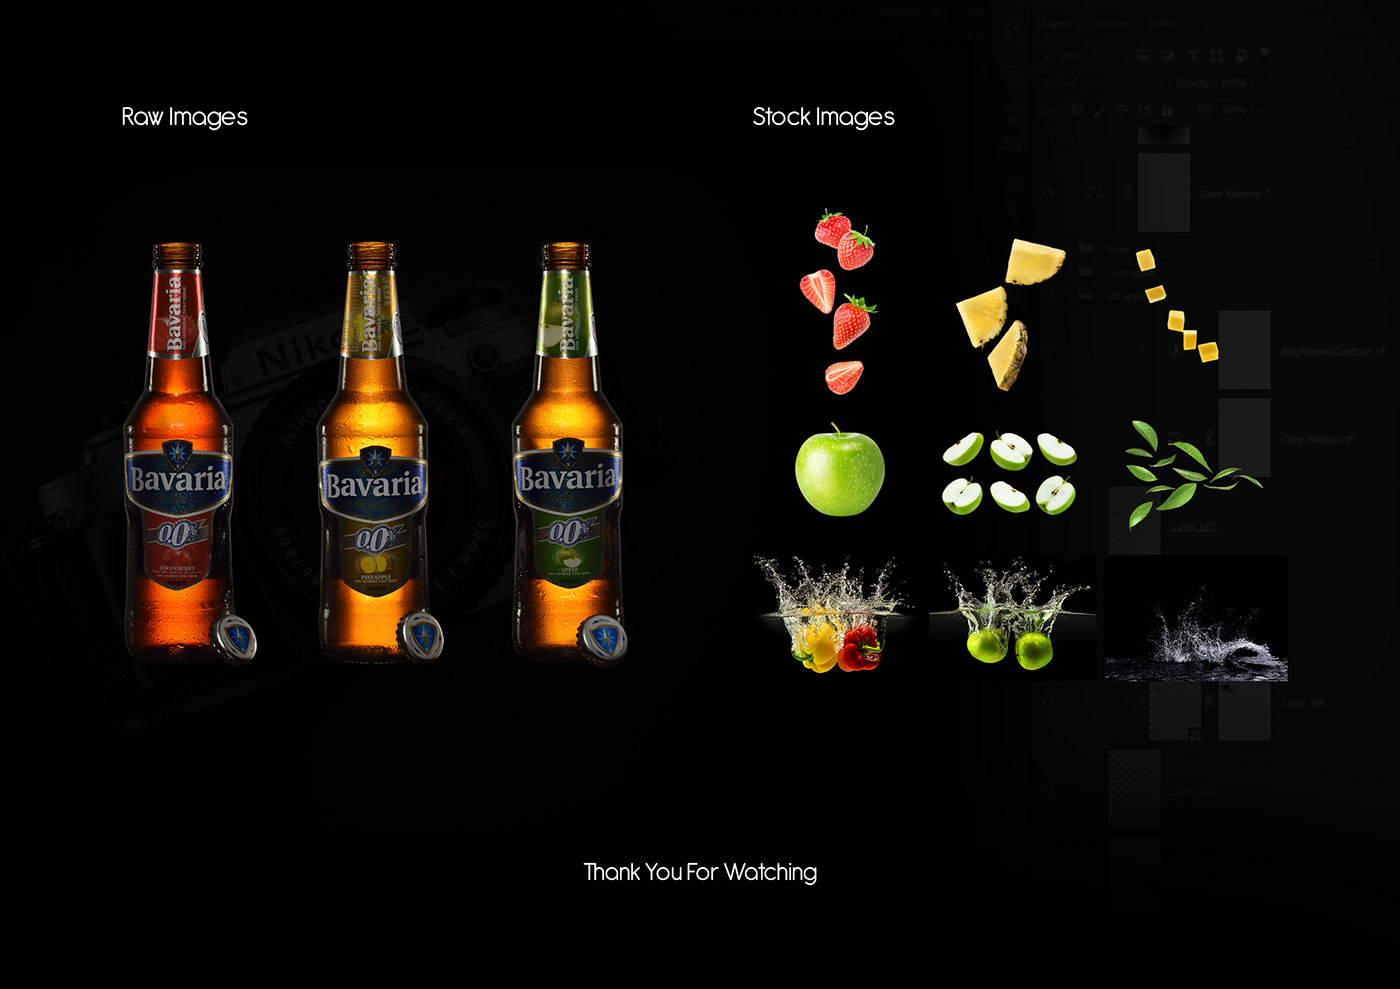 Bavaria product retouch commercial visual drinks soda Photography 